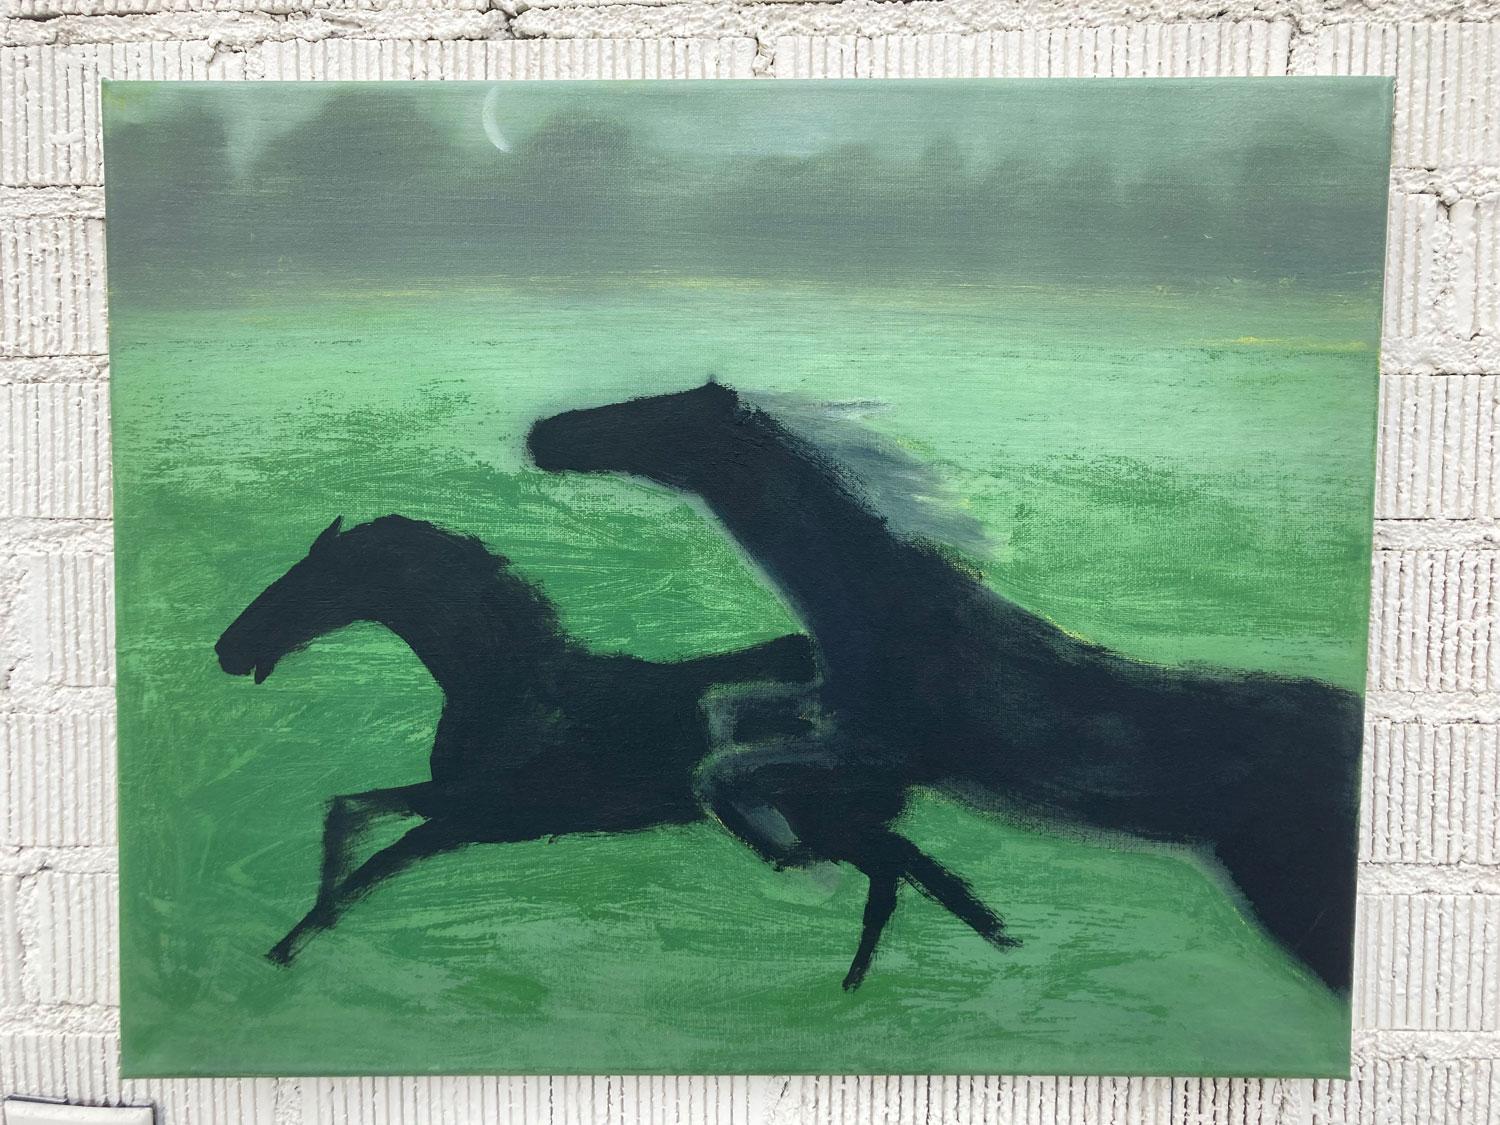 <p>Artist Comments<br>Artist Nick Bontorno shares an image of two black horses running through a green field. The waning moon fades into the night, casting a subtle translucent glow on the misty landscape. Nick renders the subjects with minimal